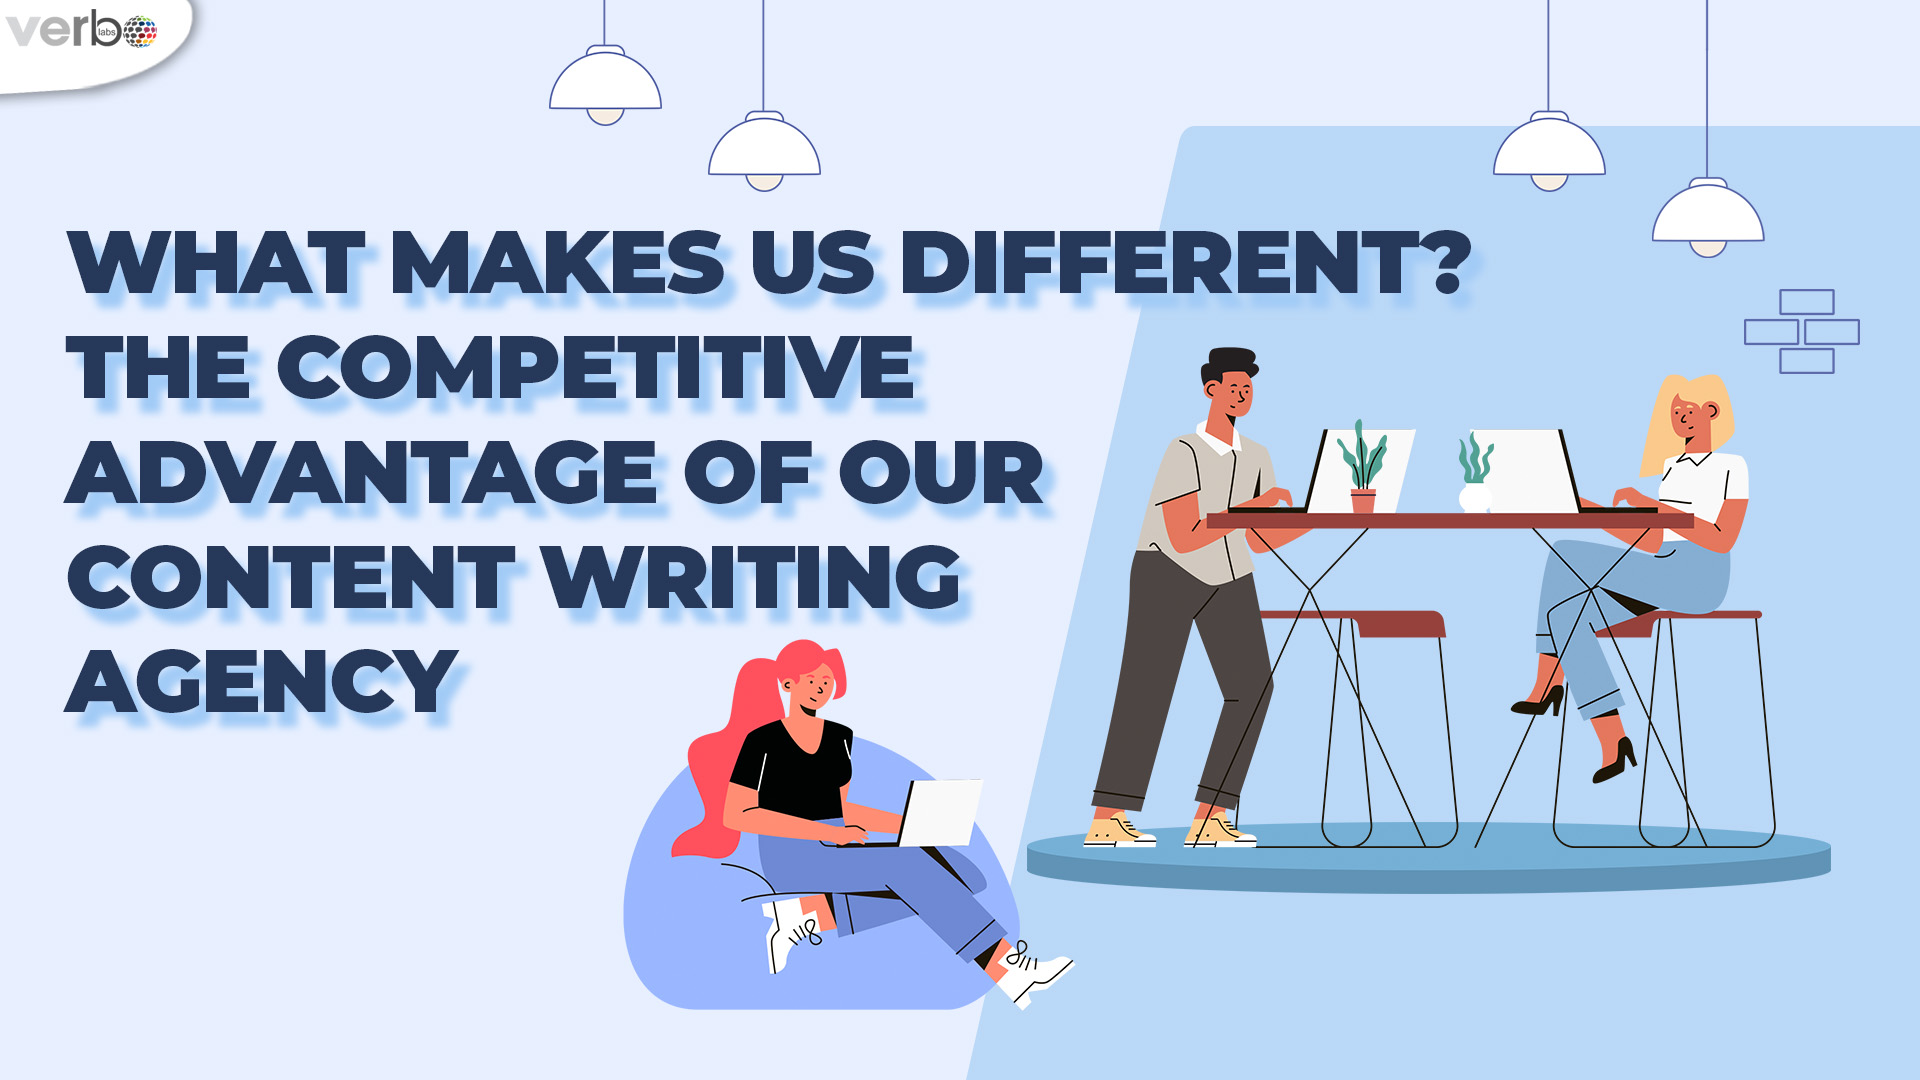 What makes us different? The competitive advantage of our content writing agency